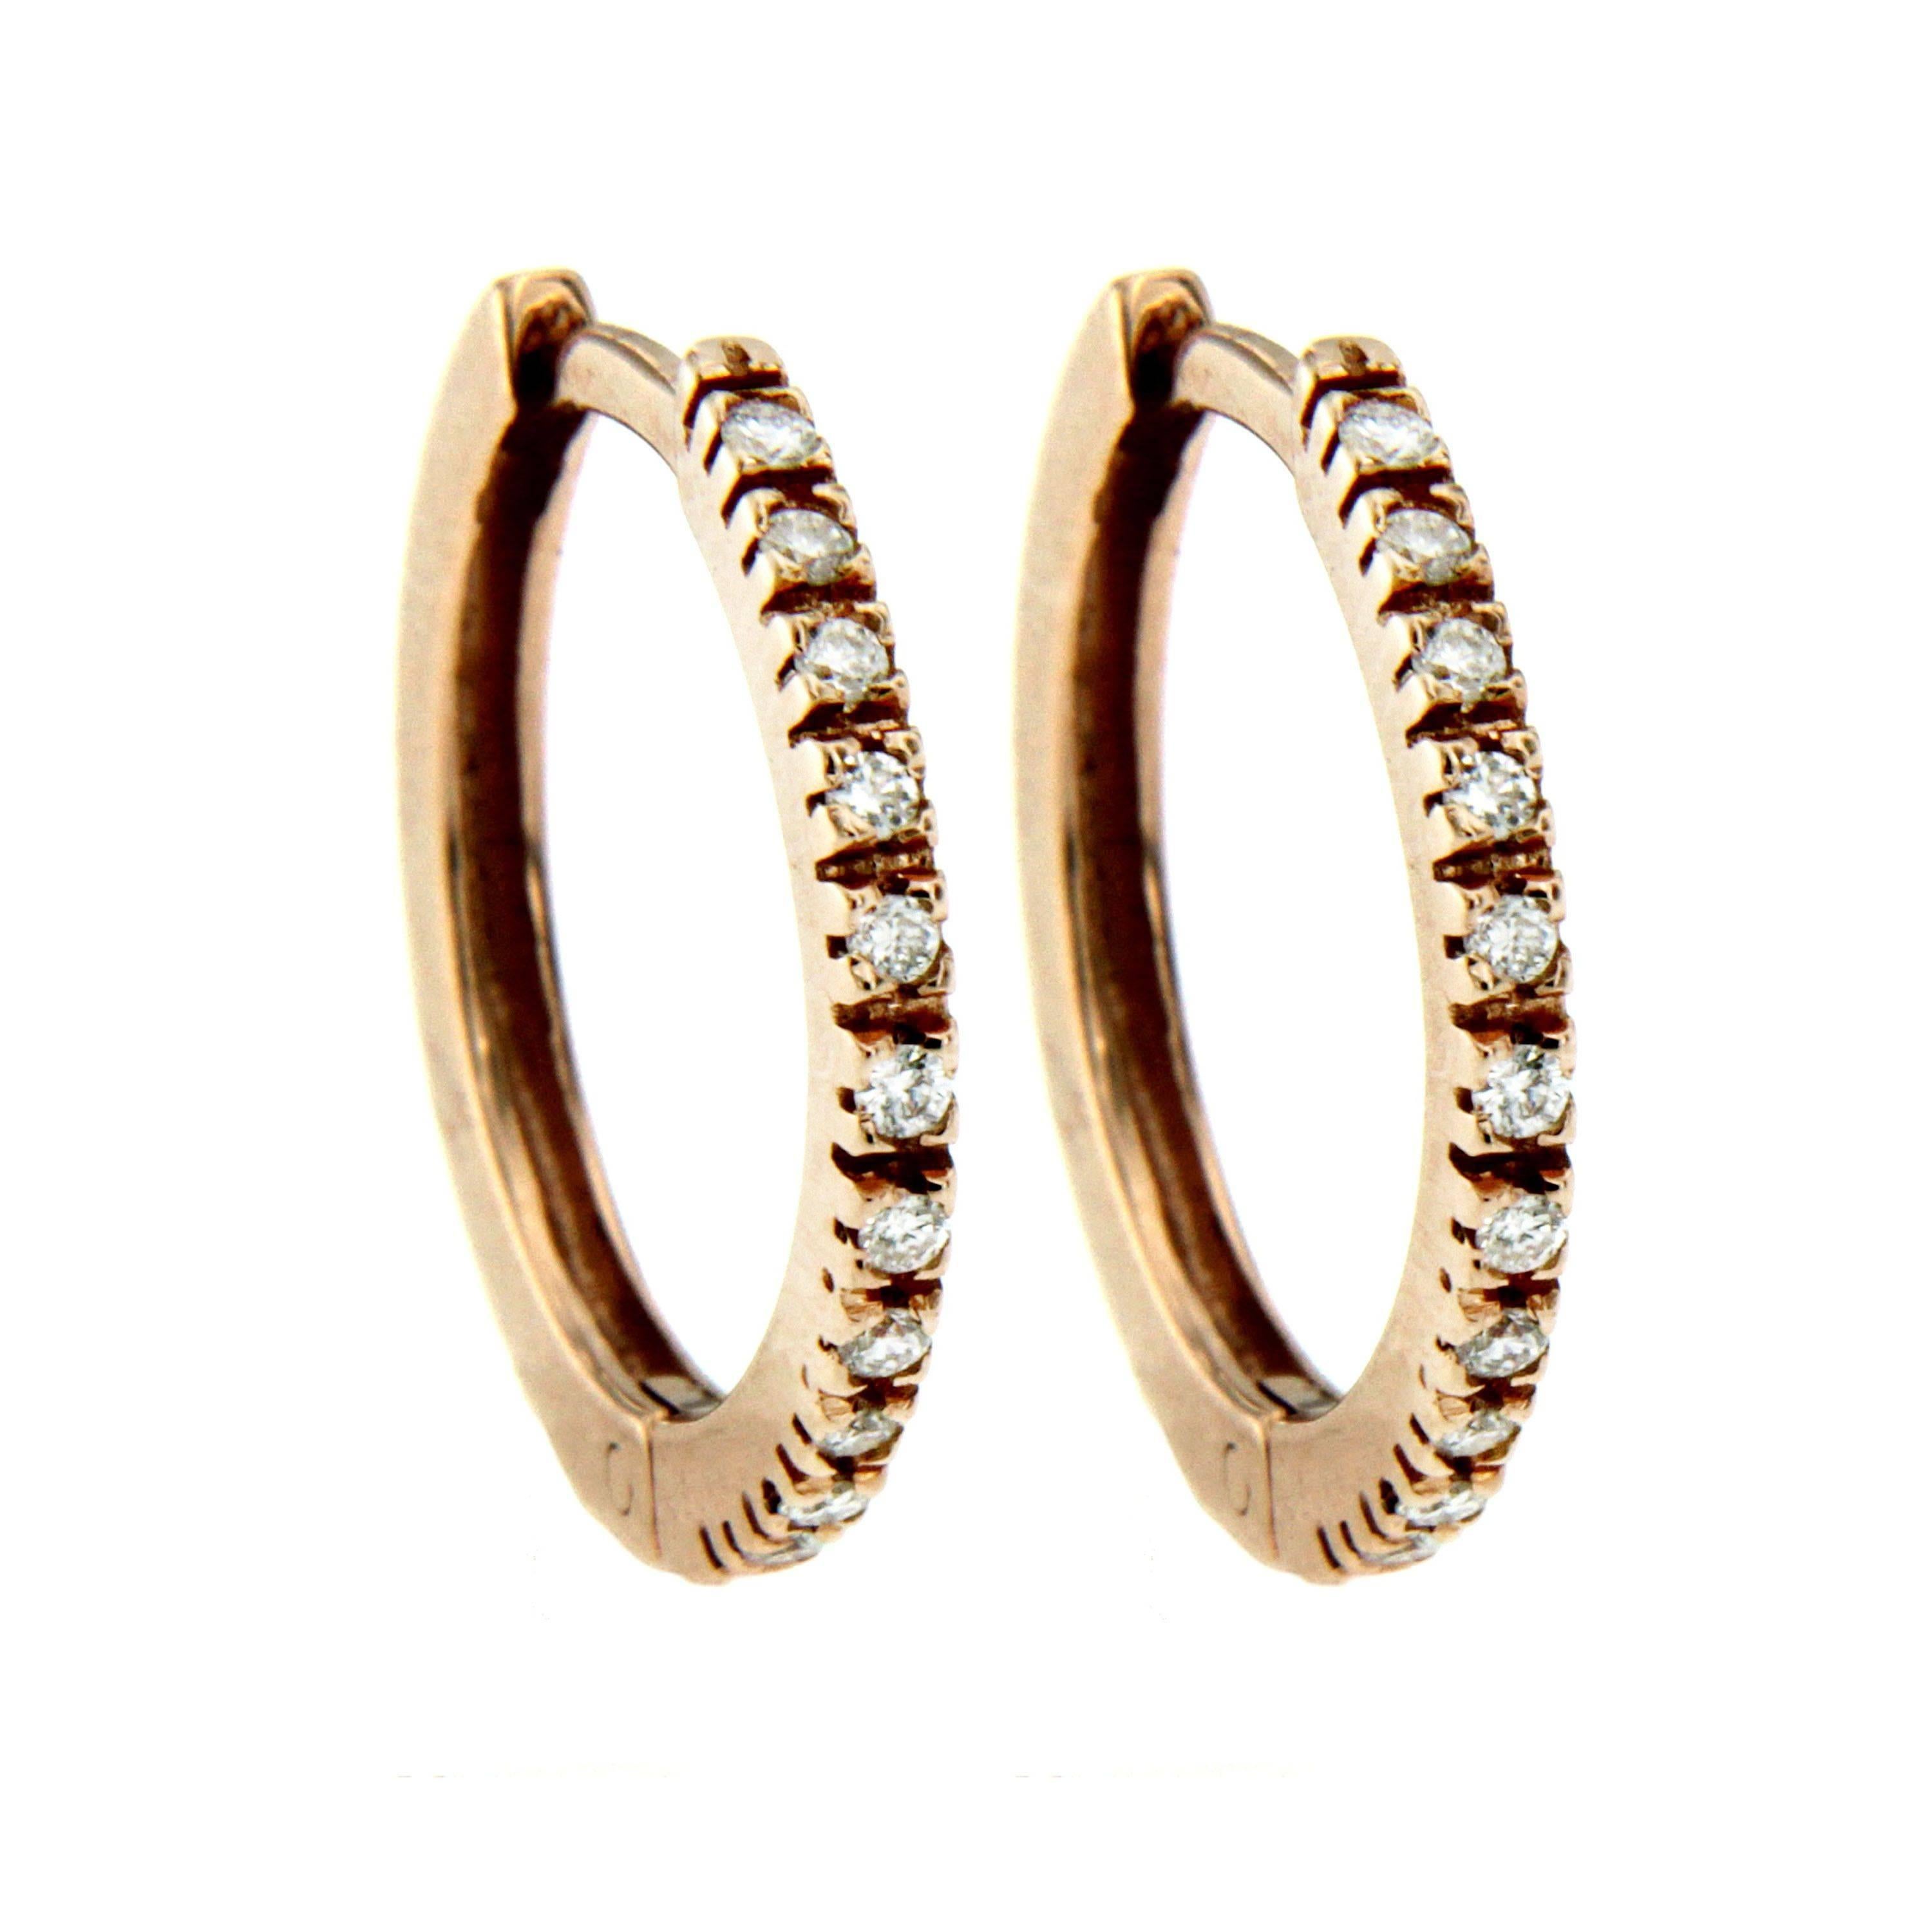 These hoop earrings are handcrafted from 18k rose gold and embellished with 0.15-carats of sparkling diamonds. The delicate size makes them perfect for every day.

This earrings are from our own production, possibility to custom the Gold